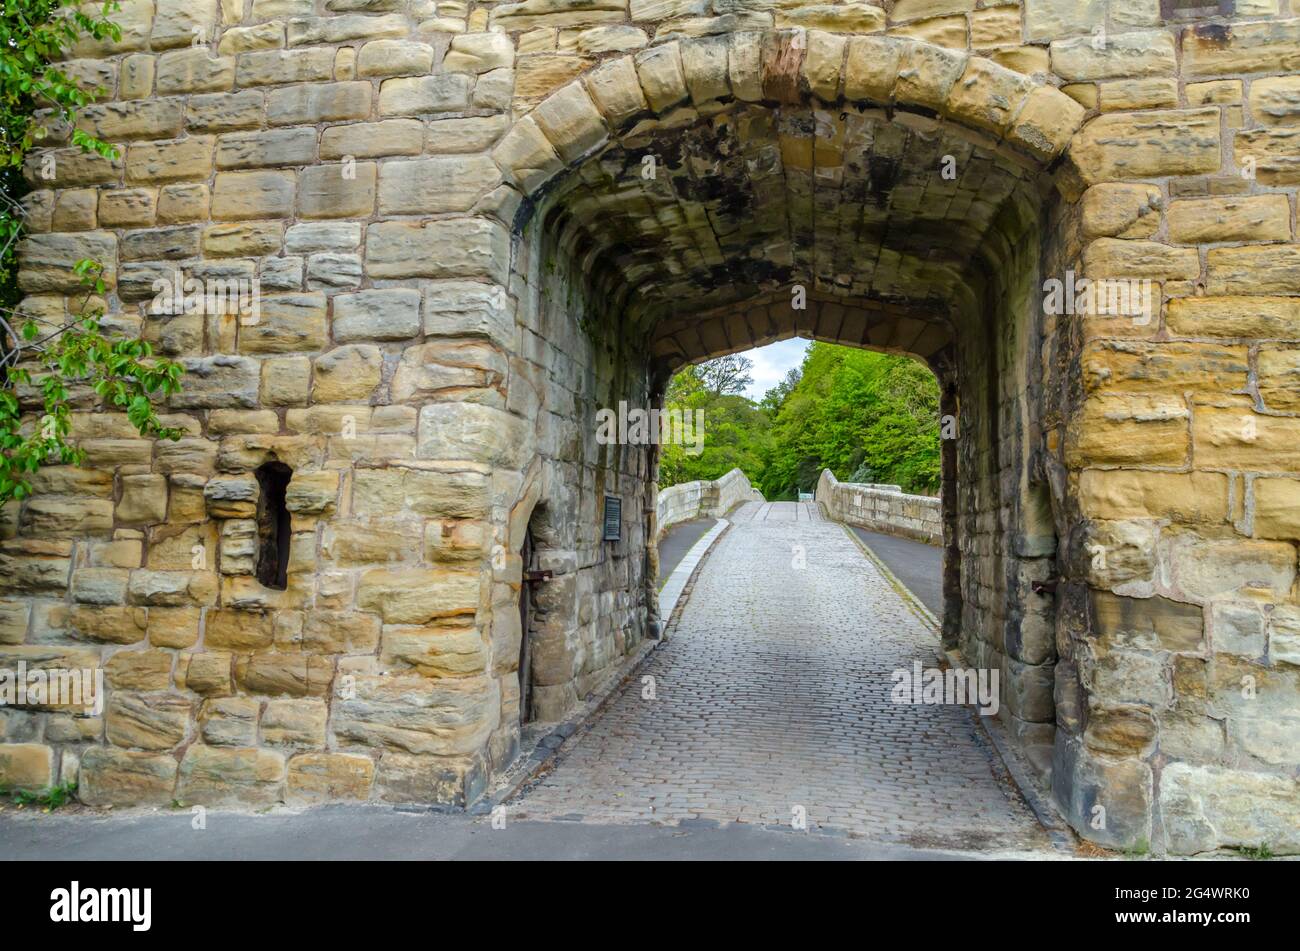 View Through Warkworth Bridge Gateway and across Warkworth Bridge at Warkworth, Northumberland.  The Medieval Bridge and Archway are Grade II Listed. Stock Photo